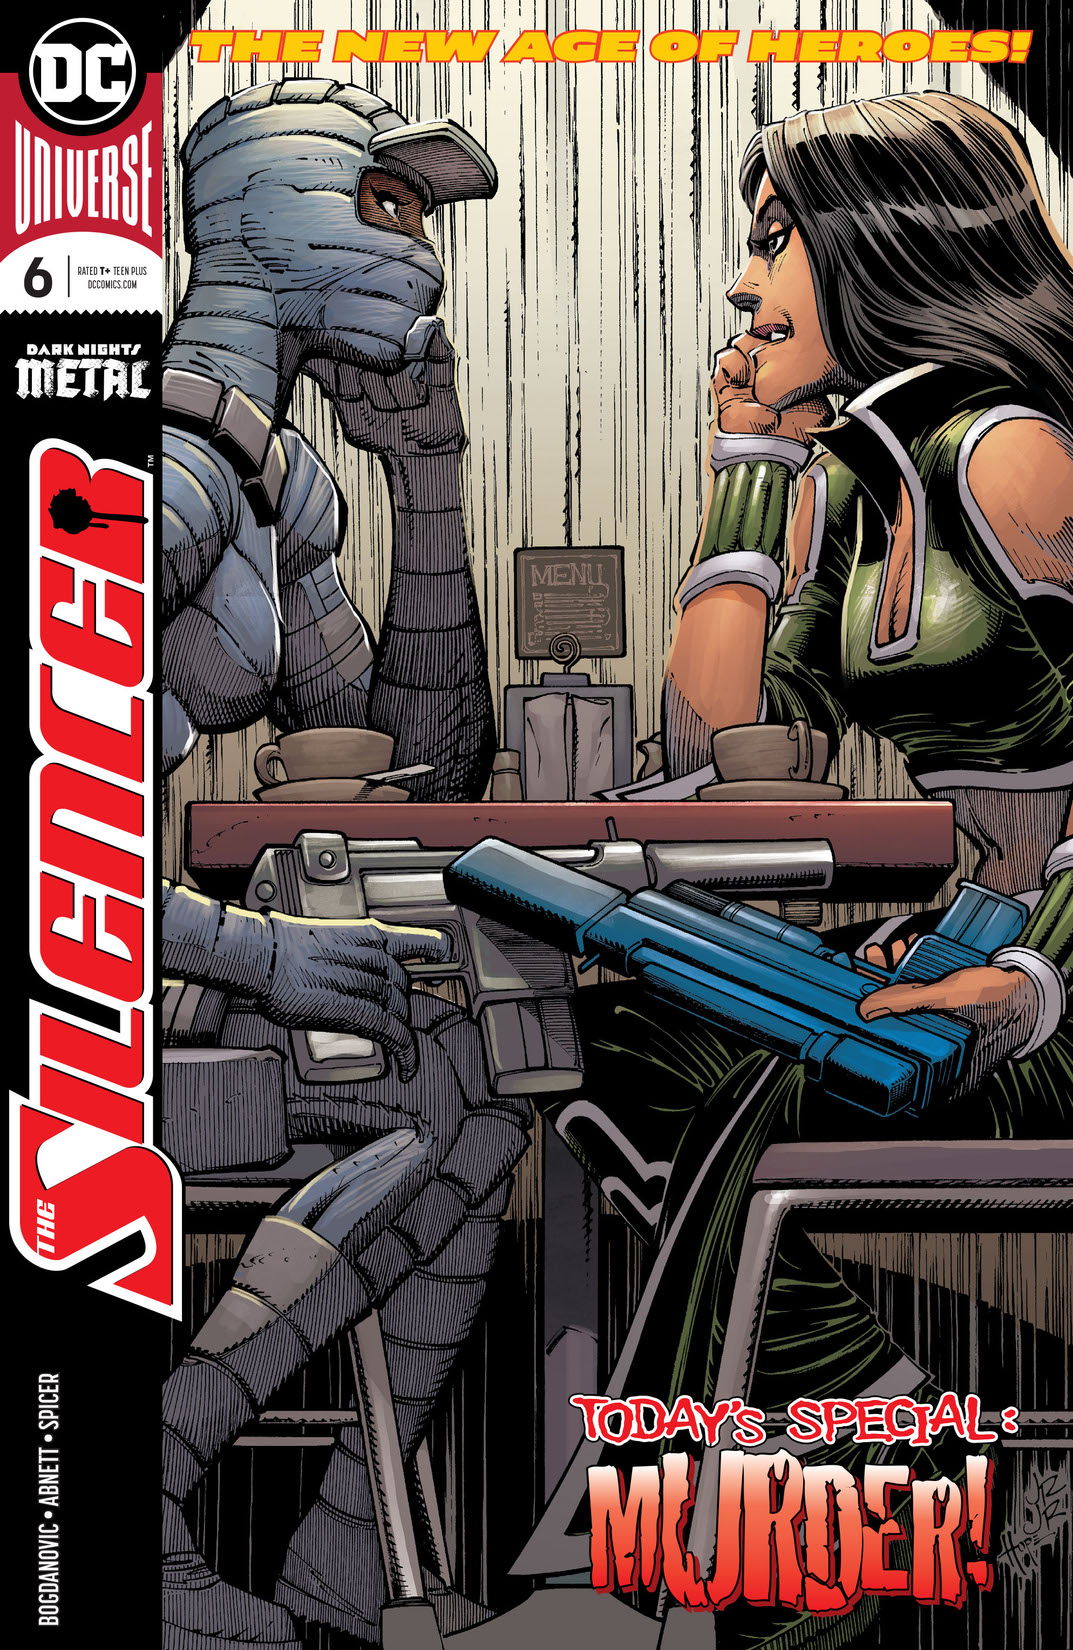 The Silencer #6 preview images